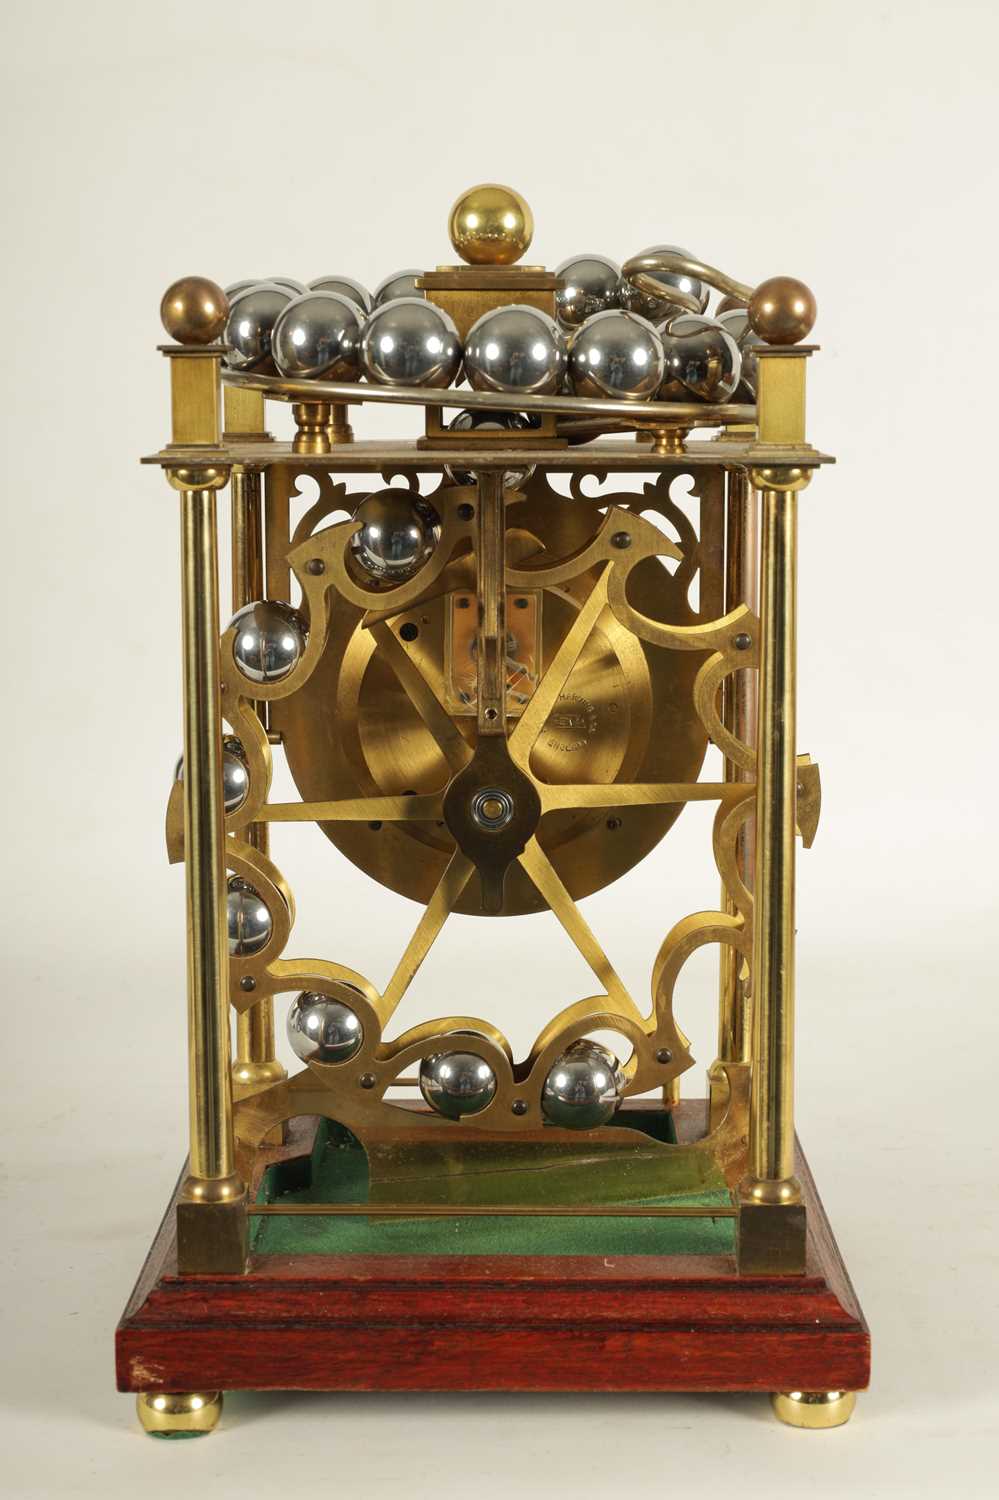 HARDING & BAZELEY, CHELTENHAM. A 20TH CENTURY LIMITED EDITION SPHERICAL BALL CLOCK - Image 8 of 14